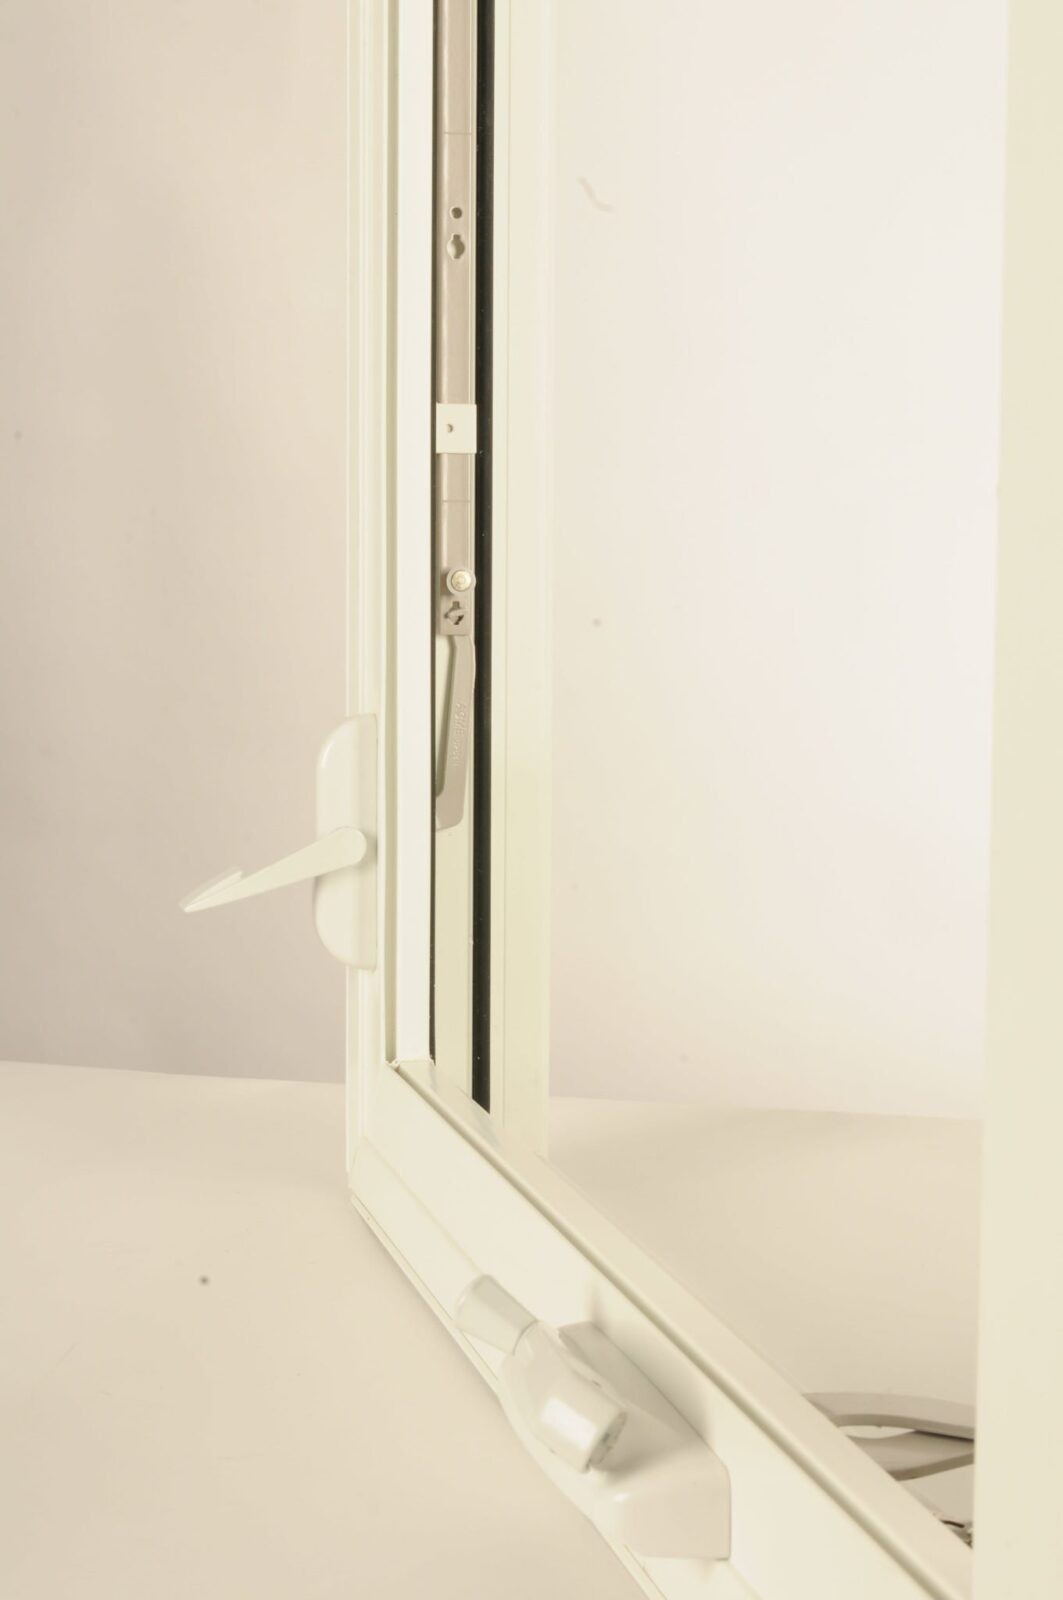 A big advantage of casement and awning windows are multi-point locks.These locks not only create an even energy-efficient seal, they also make crank windows virtually impossible to open from the outside.